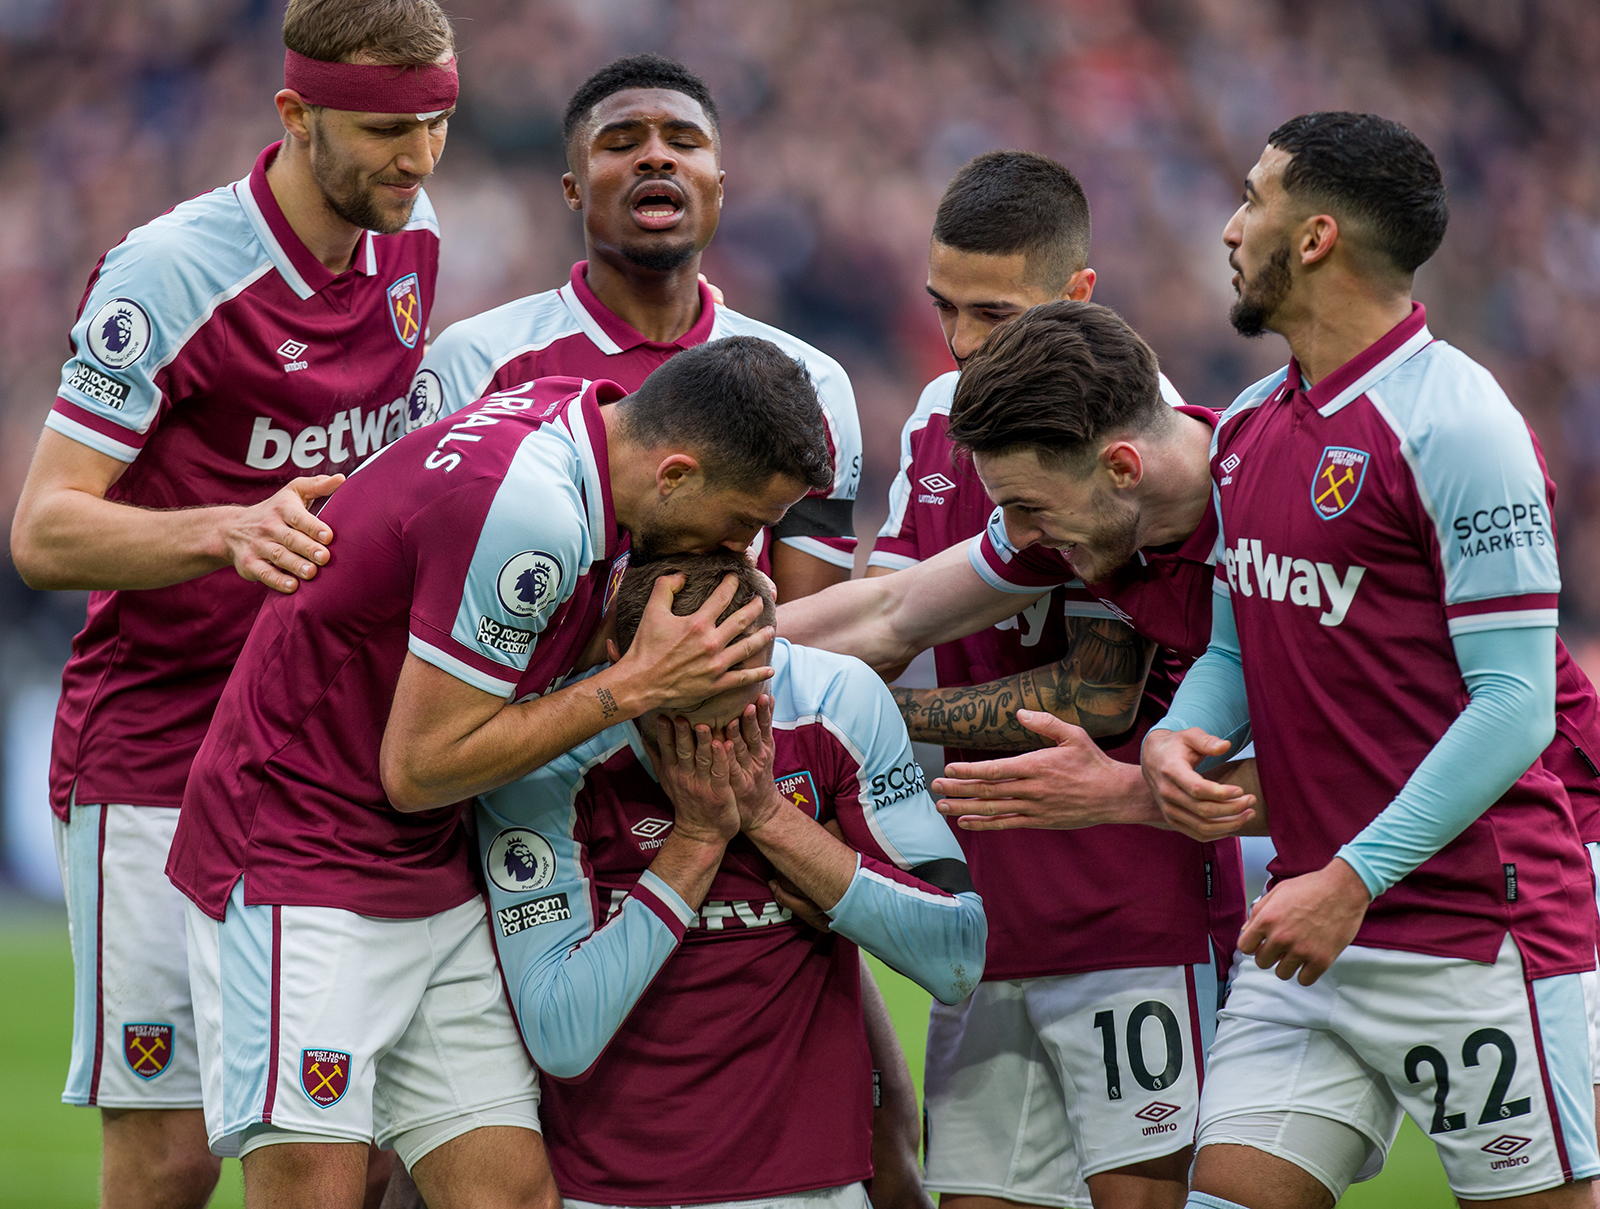 Andrey Yarmolenko (C) of West Ham reacts after scoring during the Premier League match between West Ham United and Aston Villa at the London Stadium, Stratford, England, on March 13.